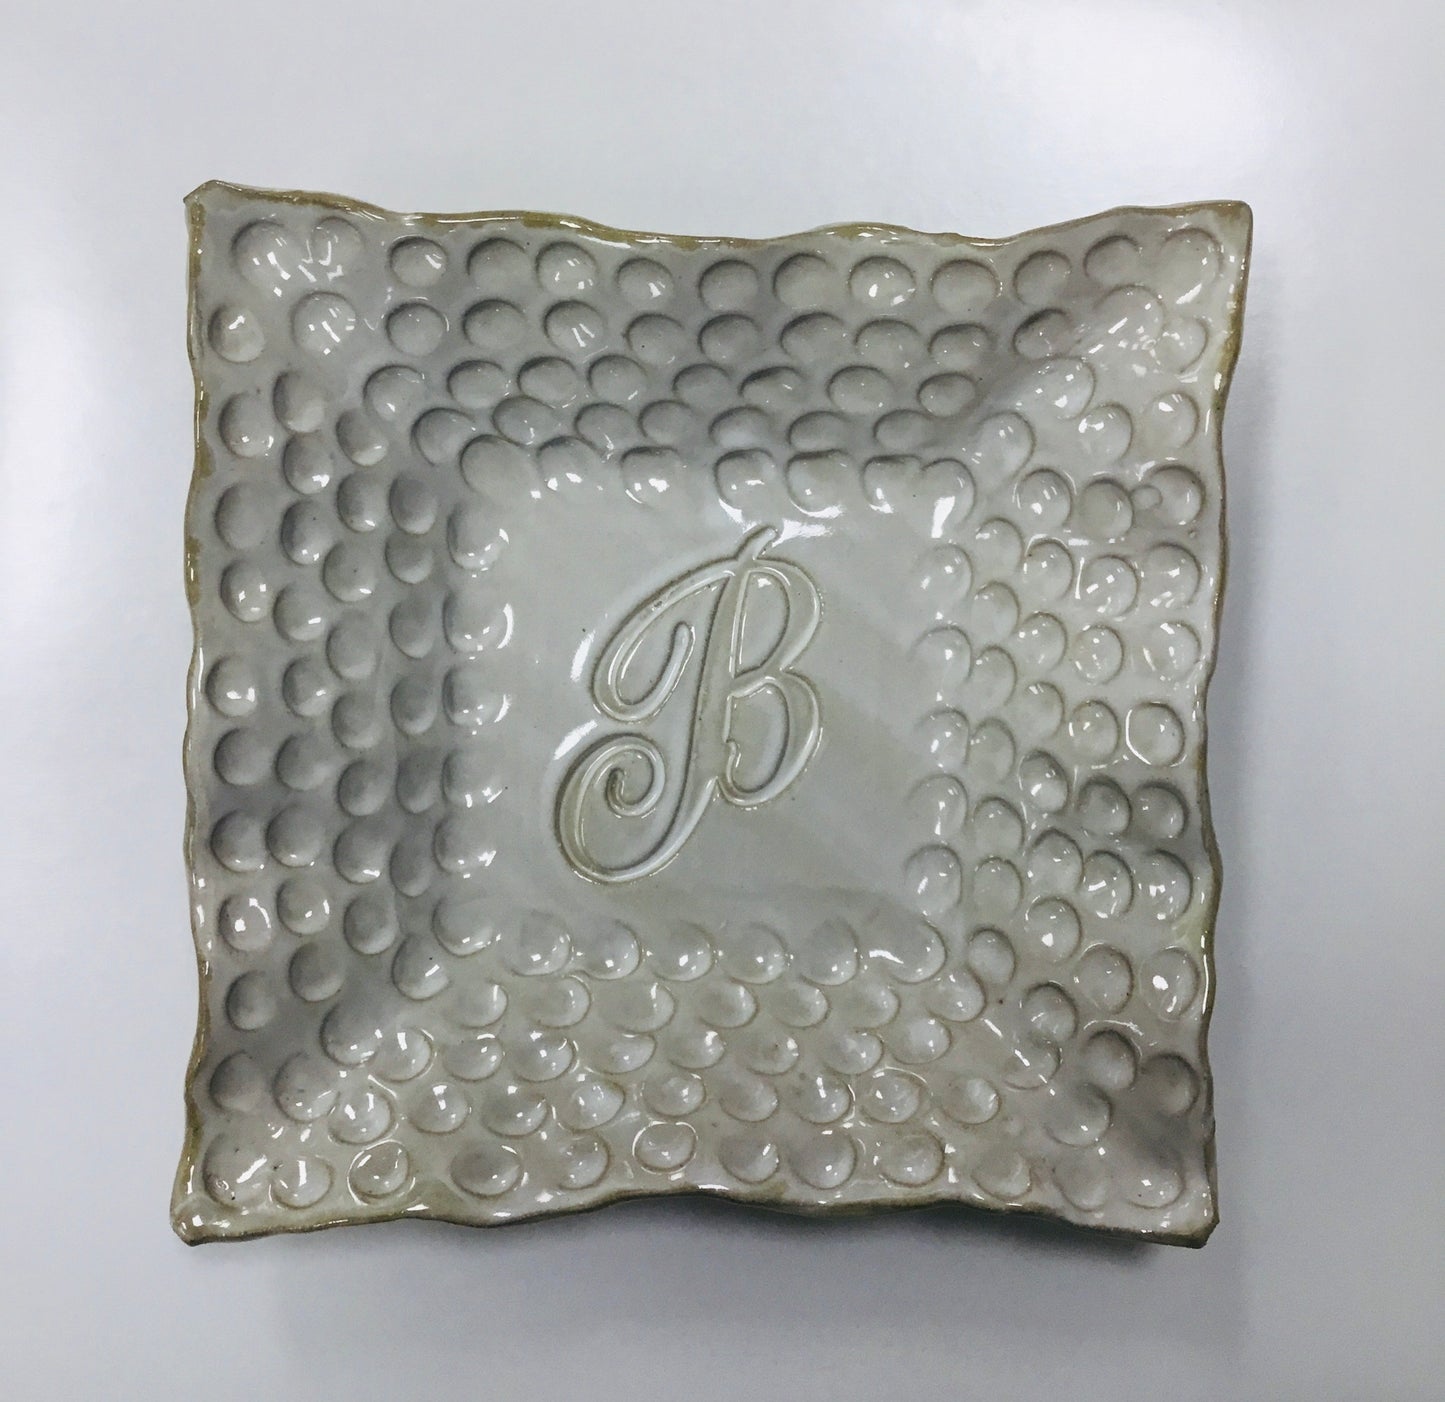 FP Large Initial Plate in High Cotton